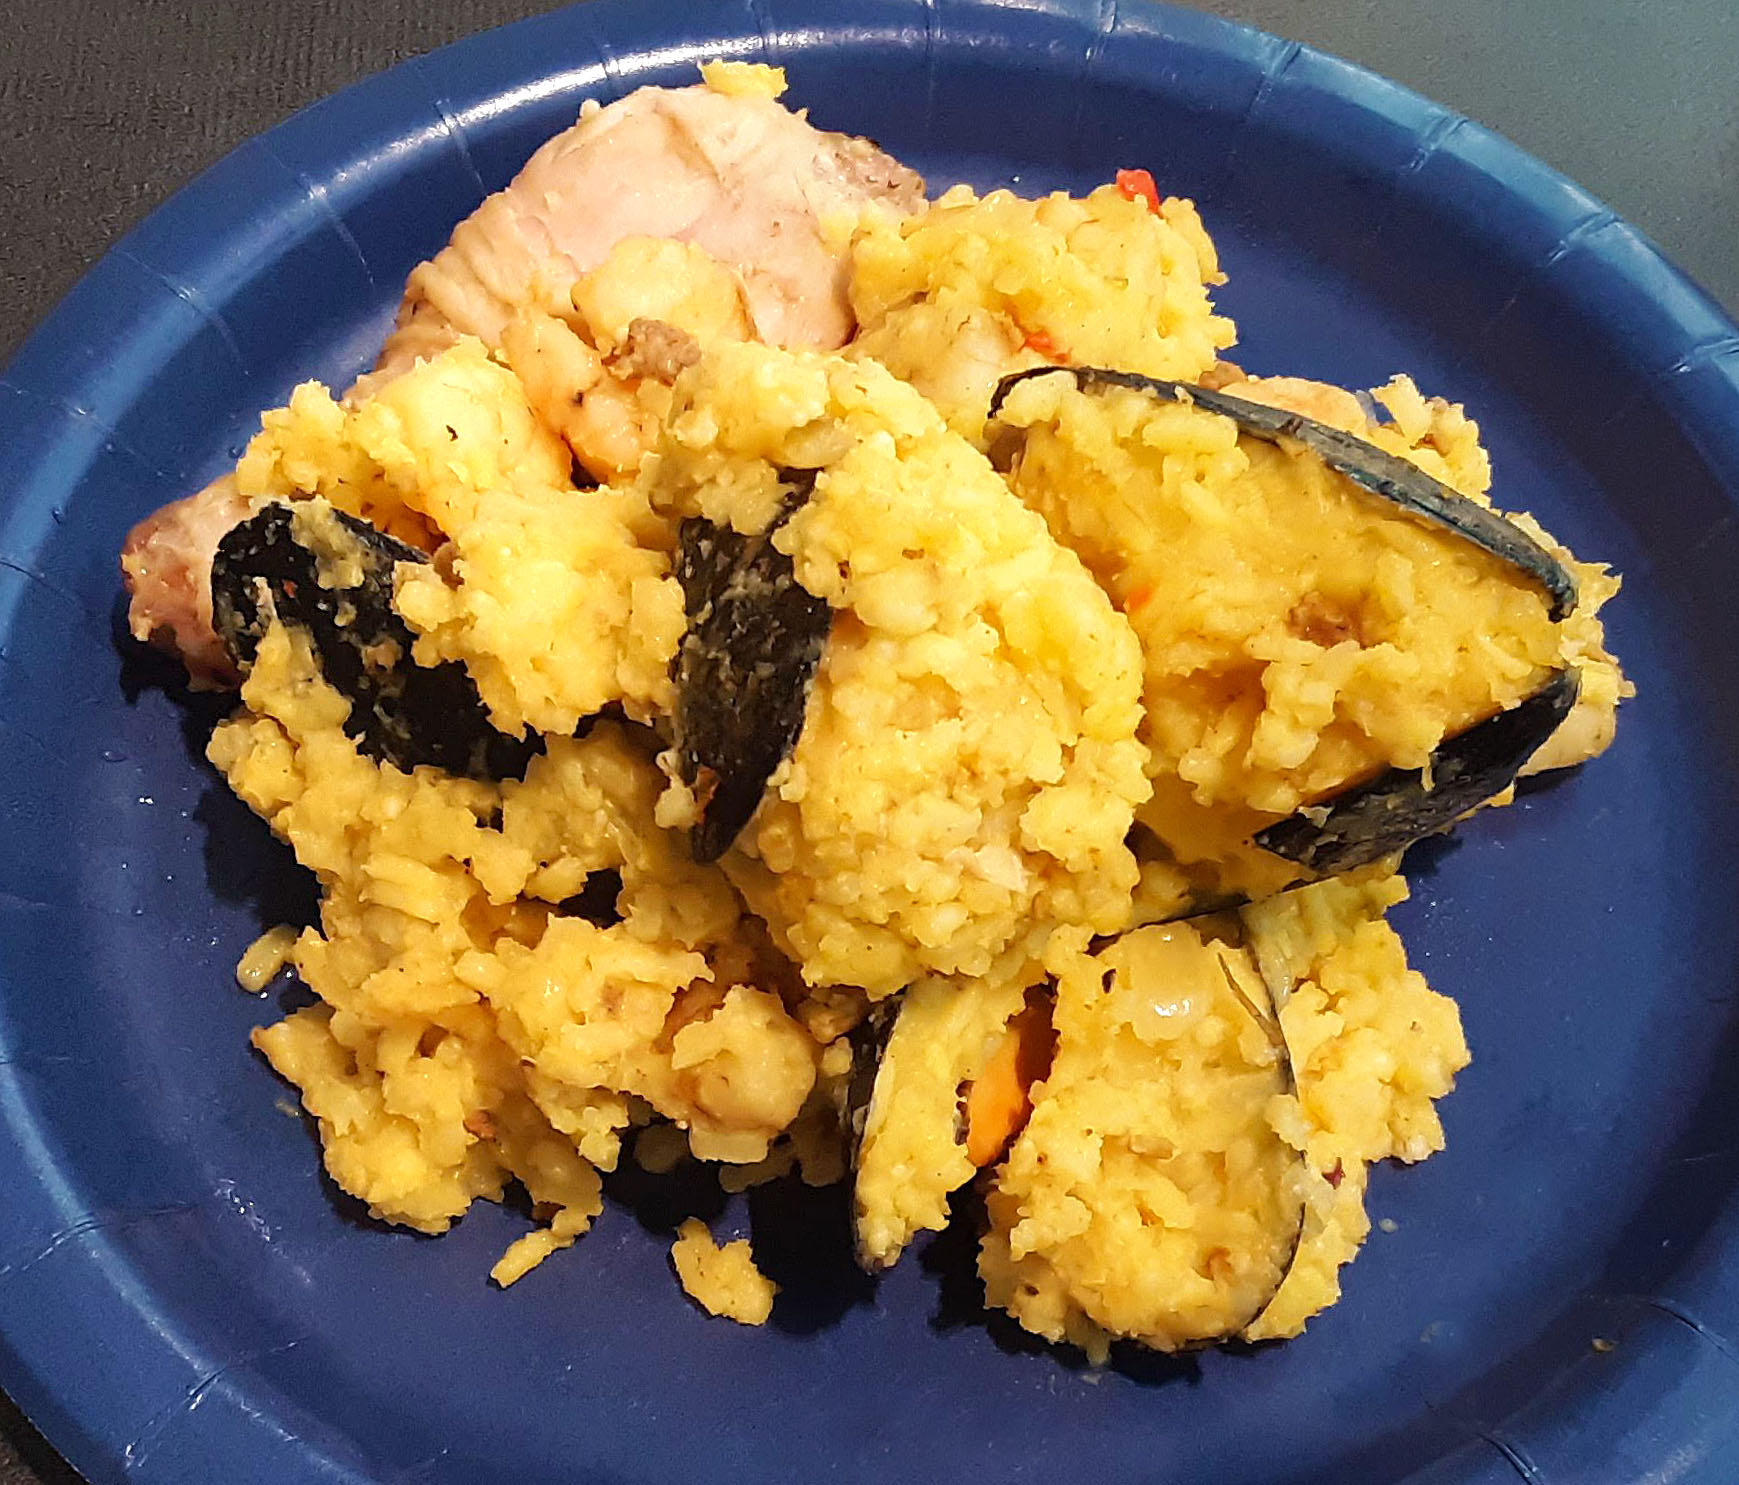 On a blue paper plate, there was a scoop of paella with lots of open mussels. Photo by Paul Young.